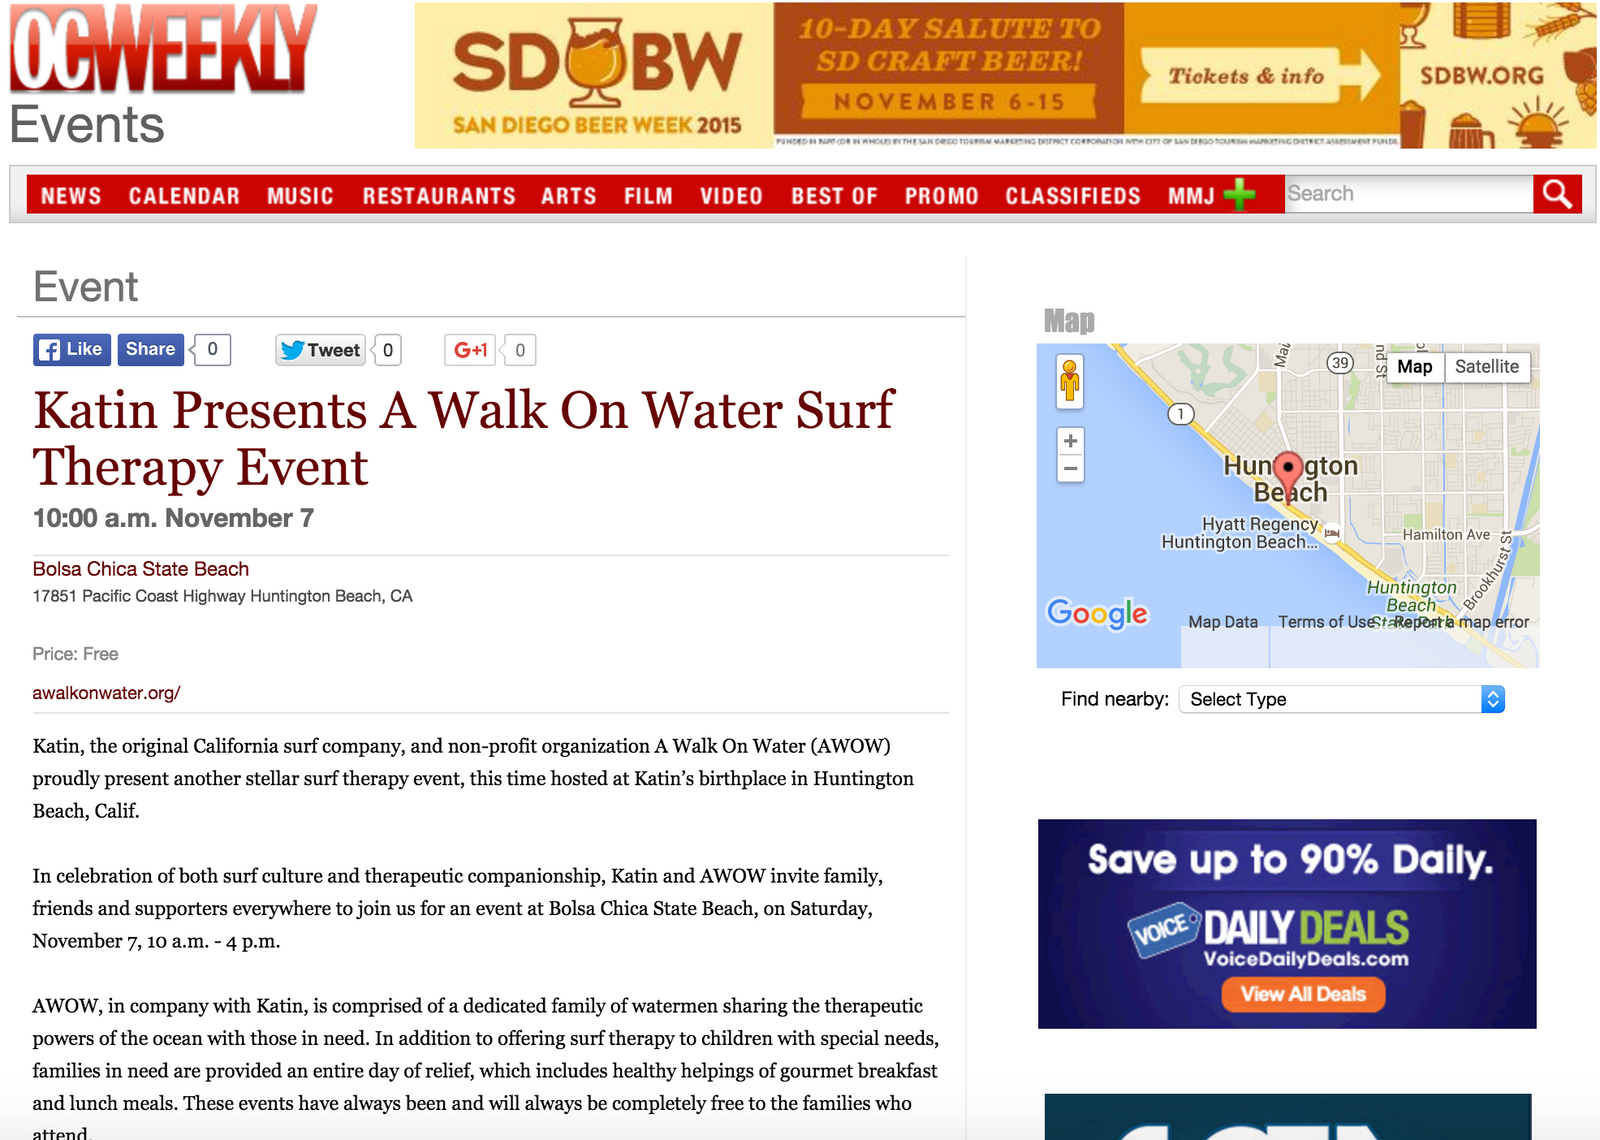 PRESS: OC Weekly 'Katin Presents A Walk On Water Surf Therapy Event'